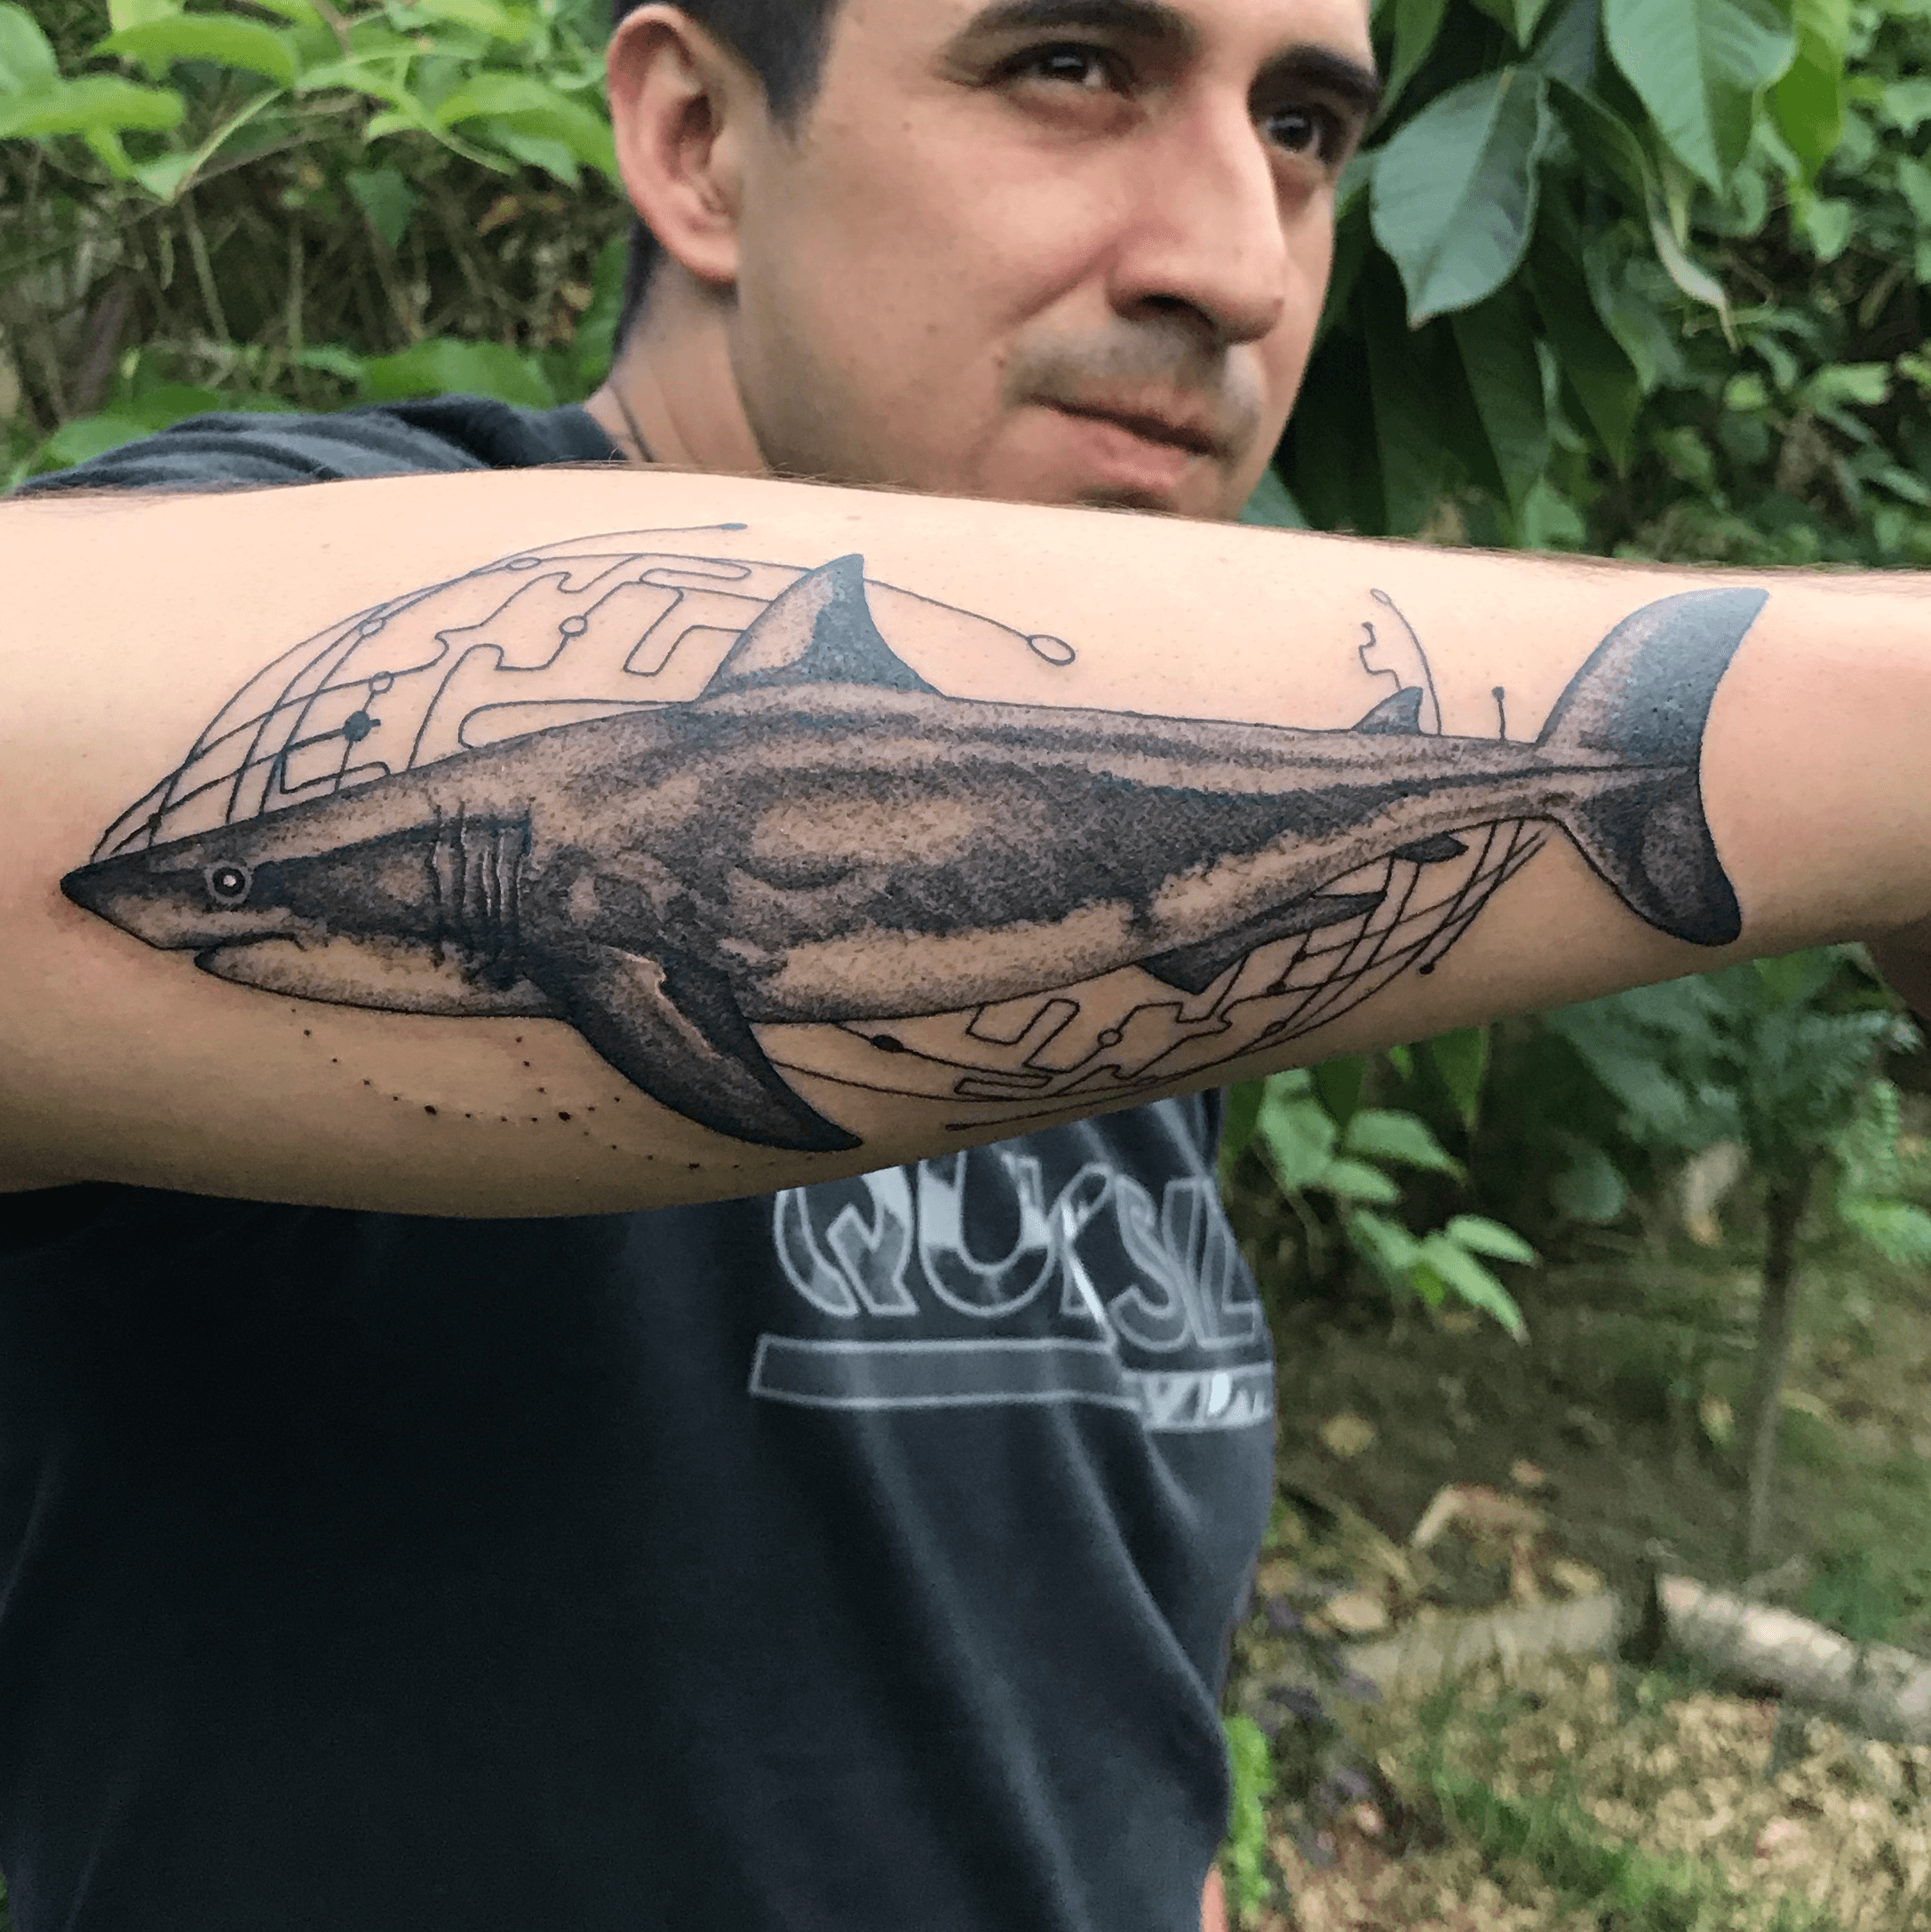 101 Amazing Shark Tattoo Ideas That Will Blow Your Mind  Shark tattoos  Tattoos Sleeve tattoos